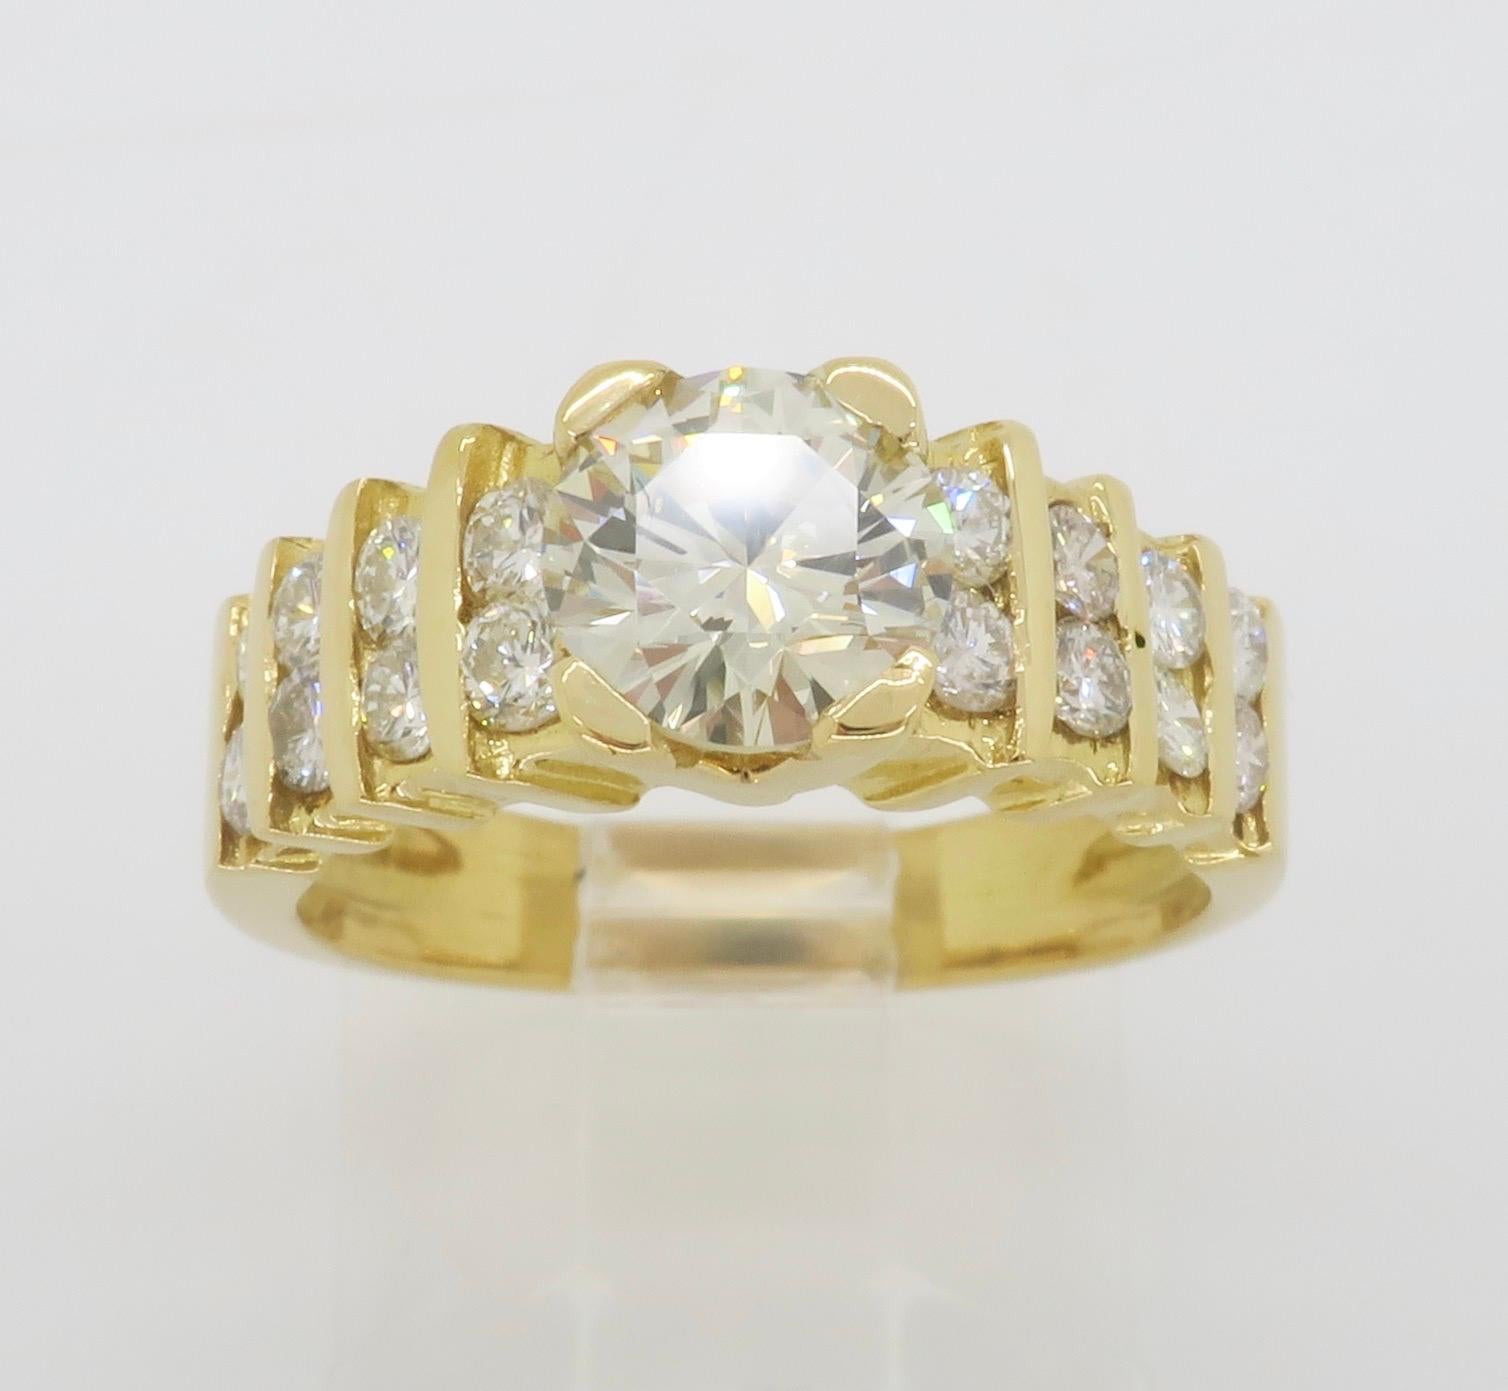 1.54ctw Diamond Encrusted Ring in 14k Yellow Gold For Sale 6